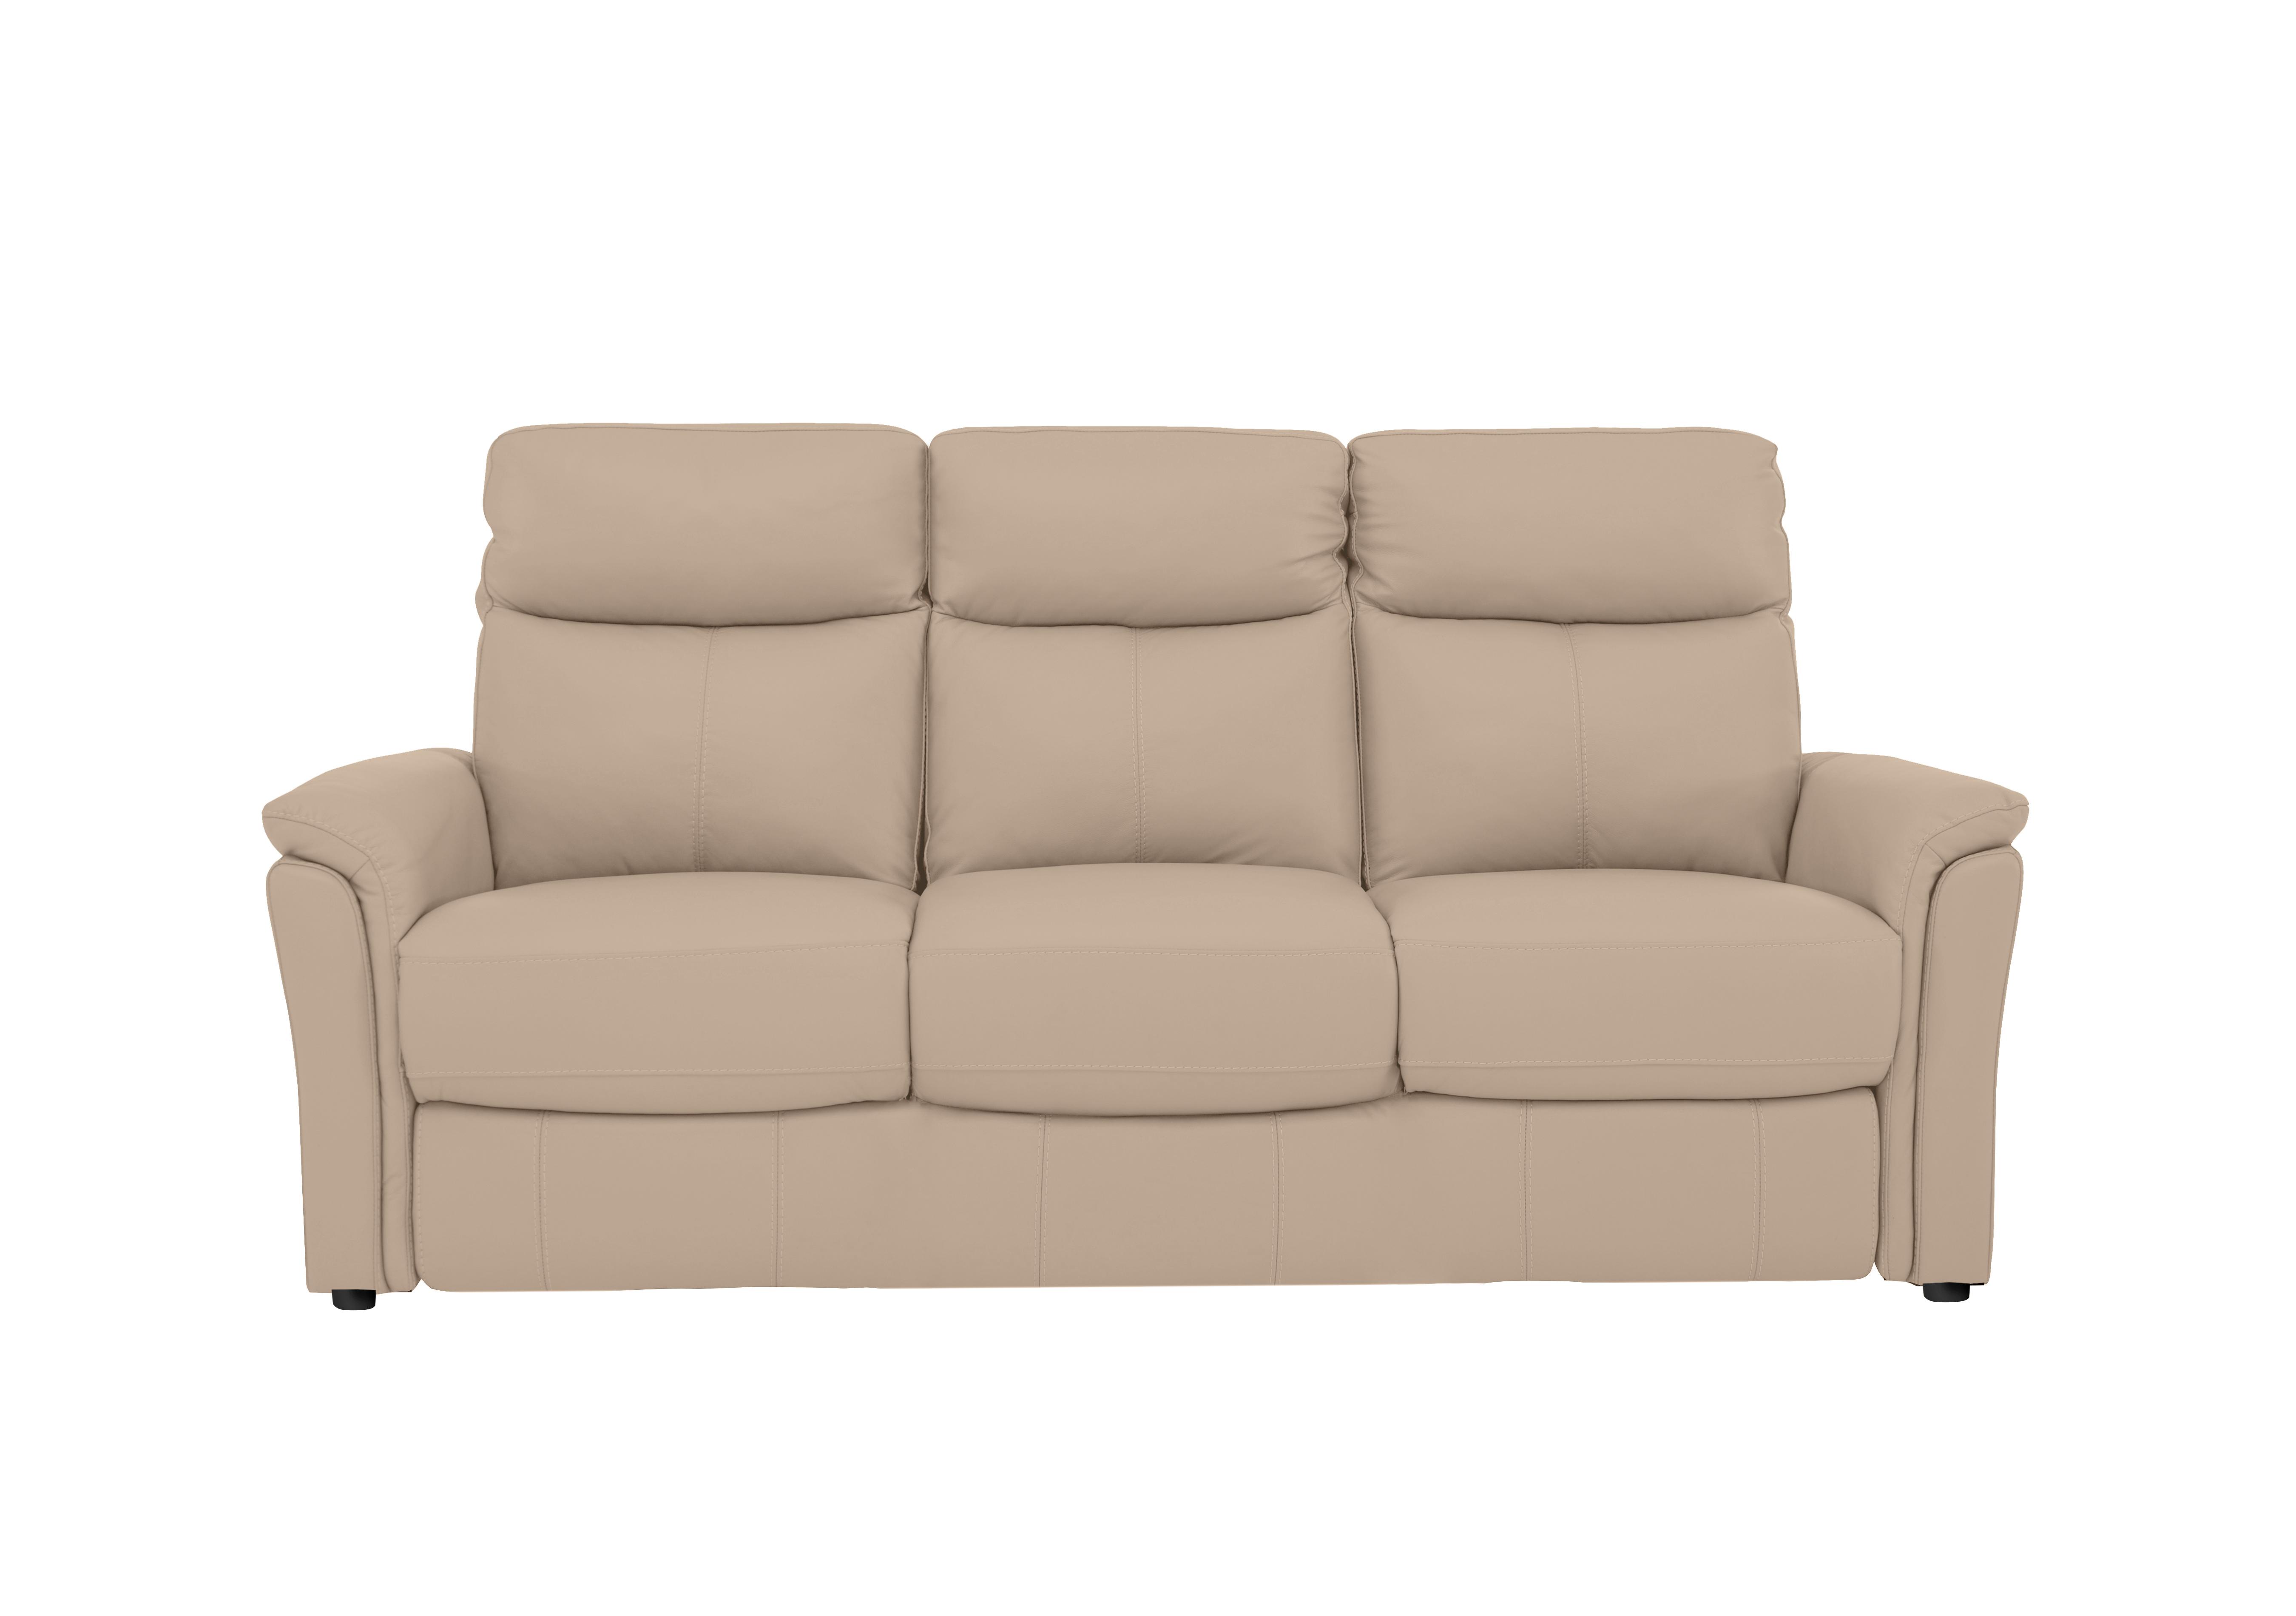 Compact Collection Piccolo 3 Seater Leather Static Sofa in Bv-039c Pebble on Furniture Village